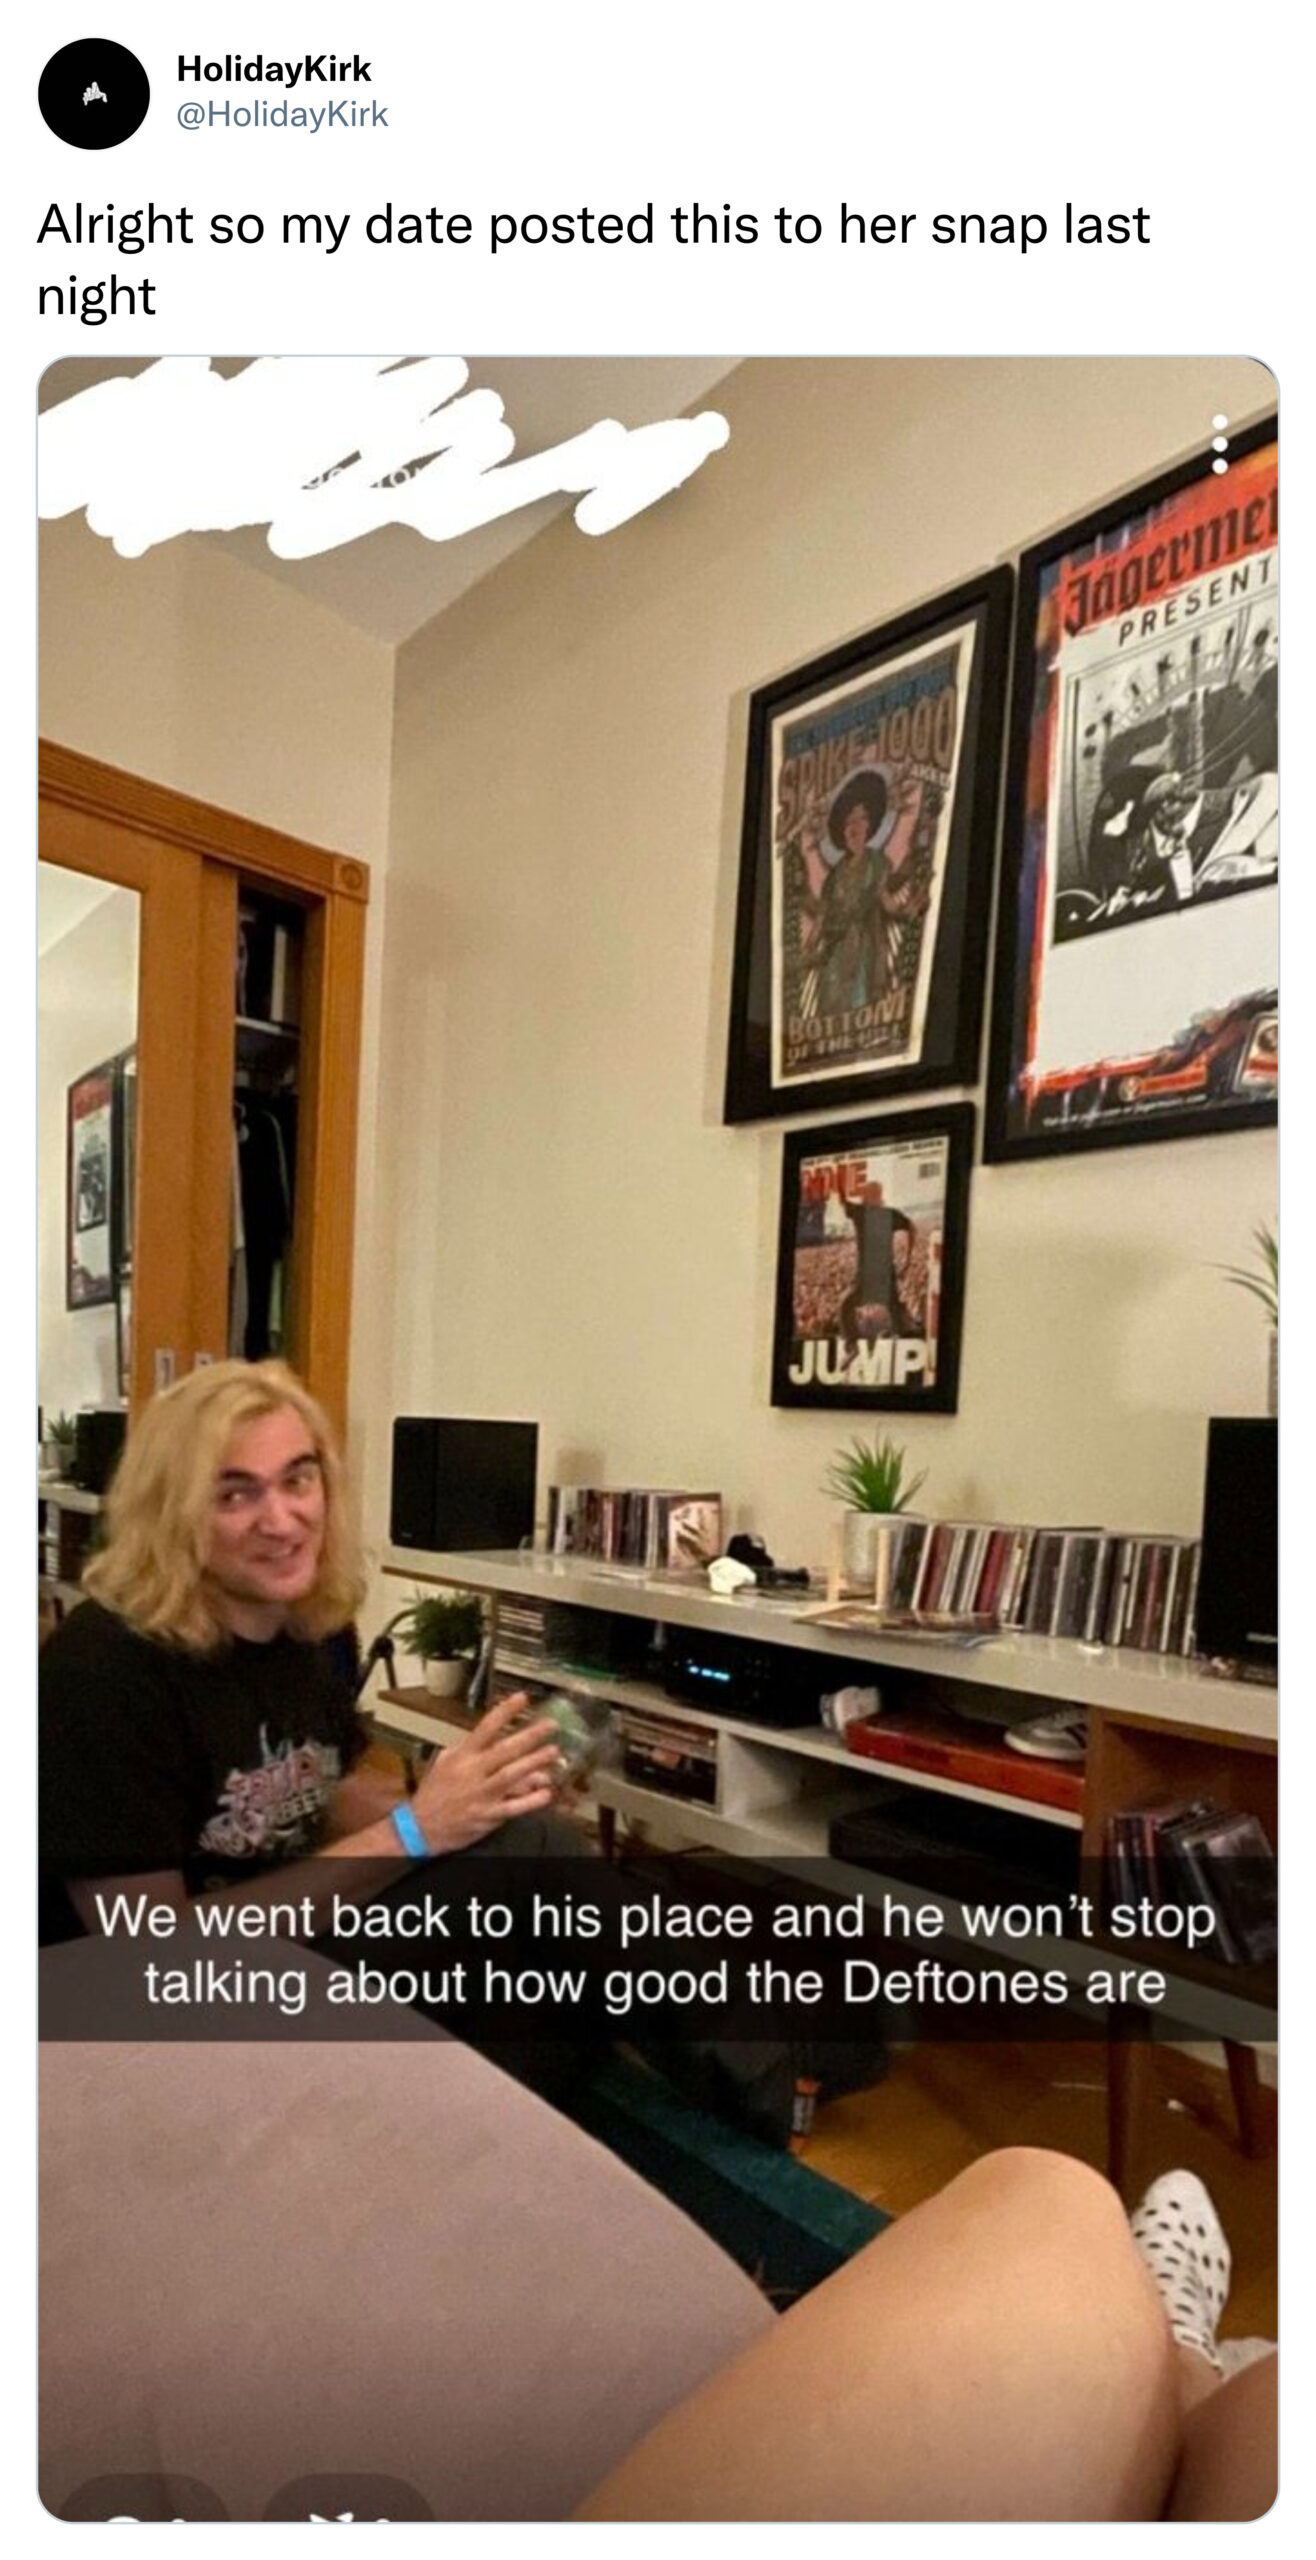 funny tweets - interior design - HolidayKirk Alright so my date posted this to her snap last night Fagerme Present Ake Bottont Of The Hil Jump! We went back to his place and he won't stop talking about how good the Deftones are